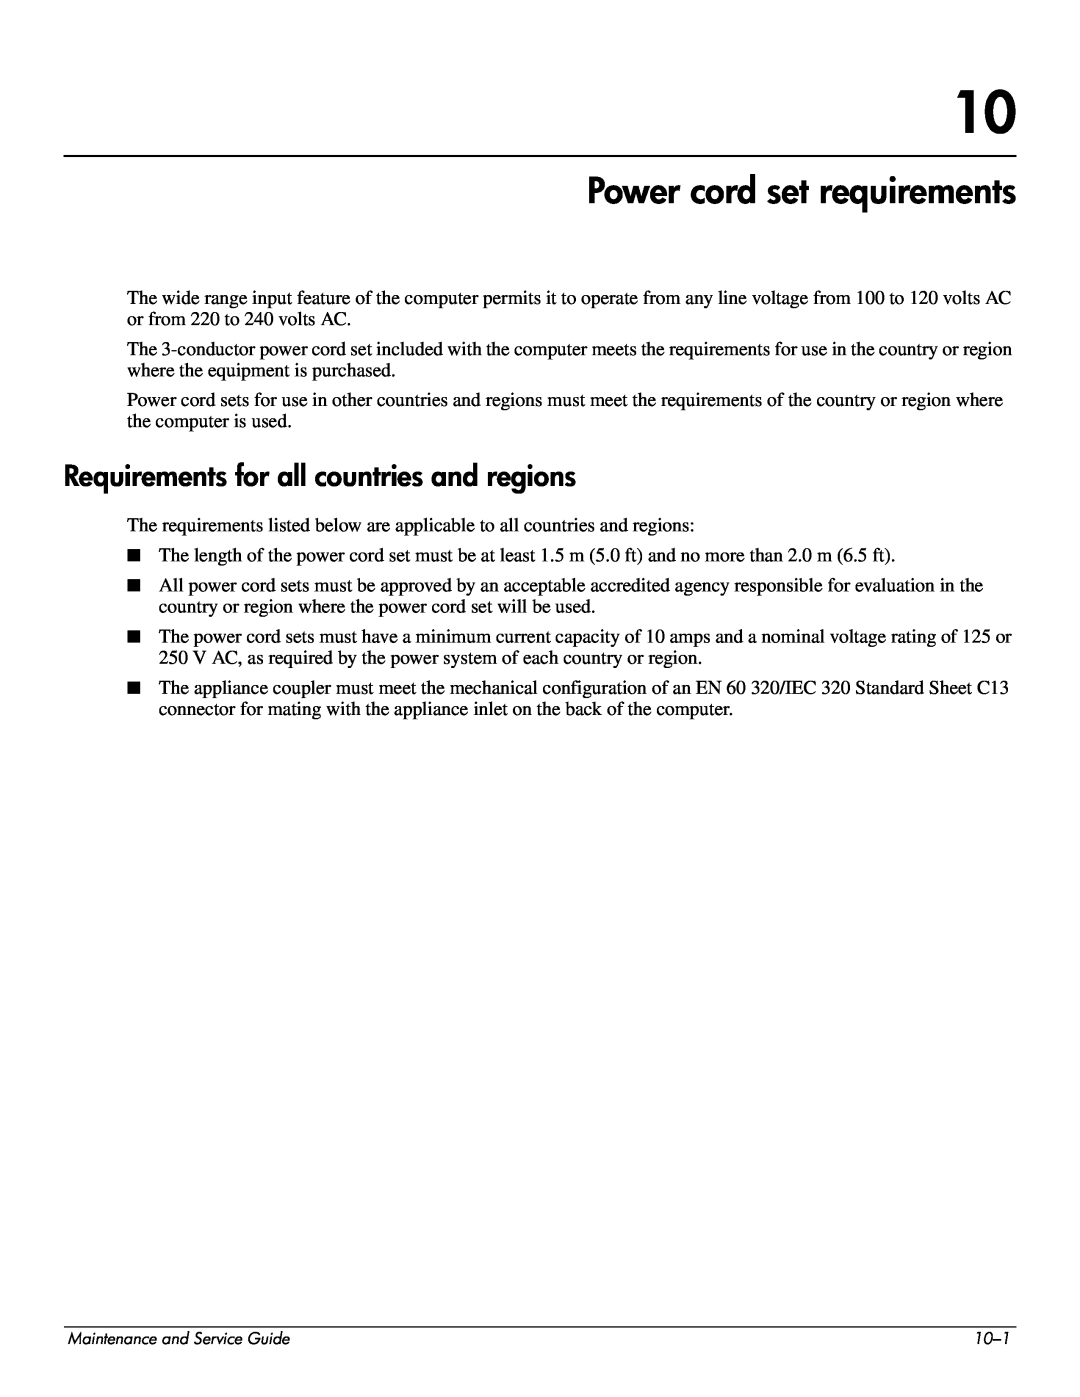 HP CQ35-114TX, CQ35-229TX, CQ35-227TX, CQ35-224TX Power cord set requirements, Requirements for all countries and regions 